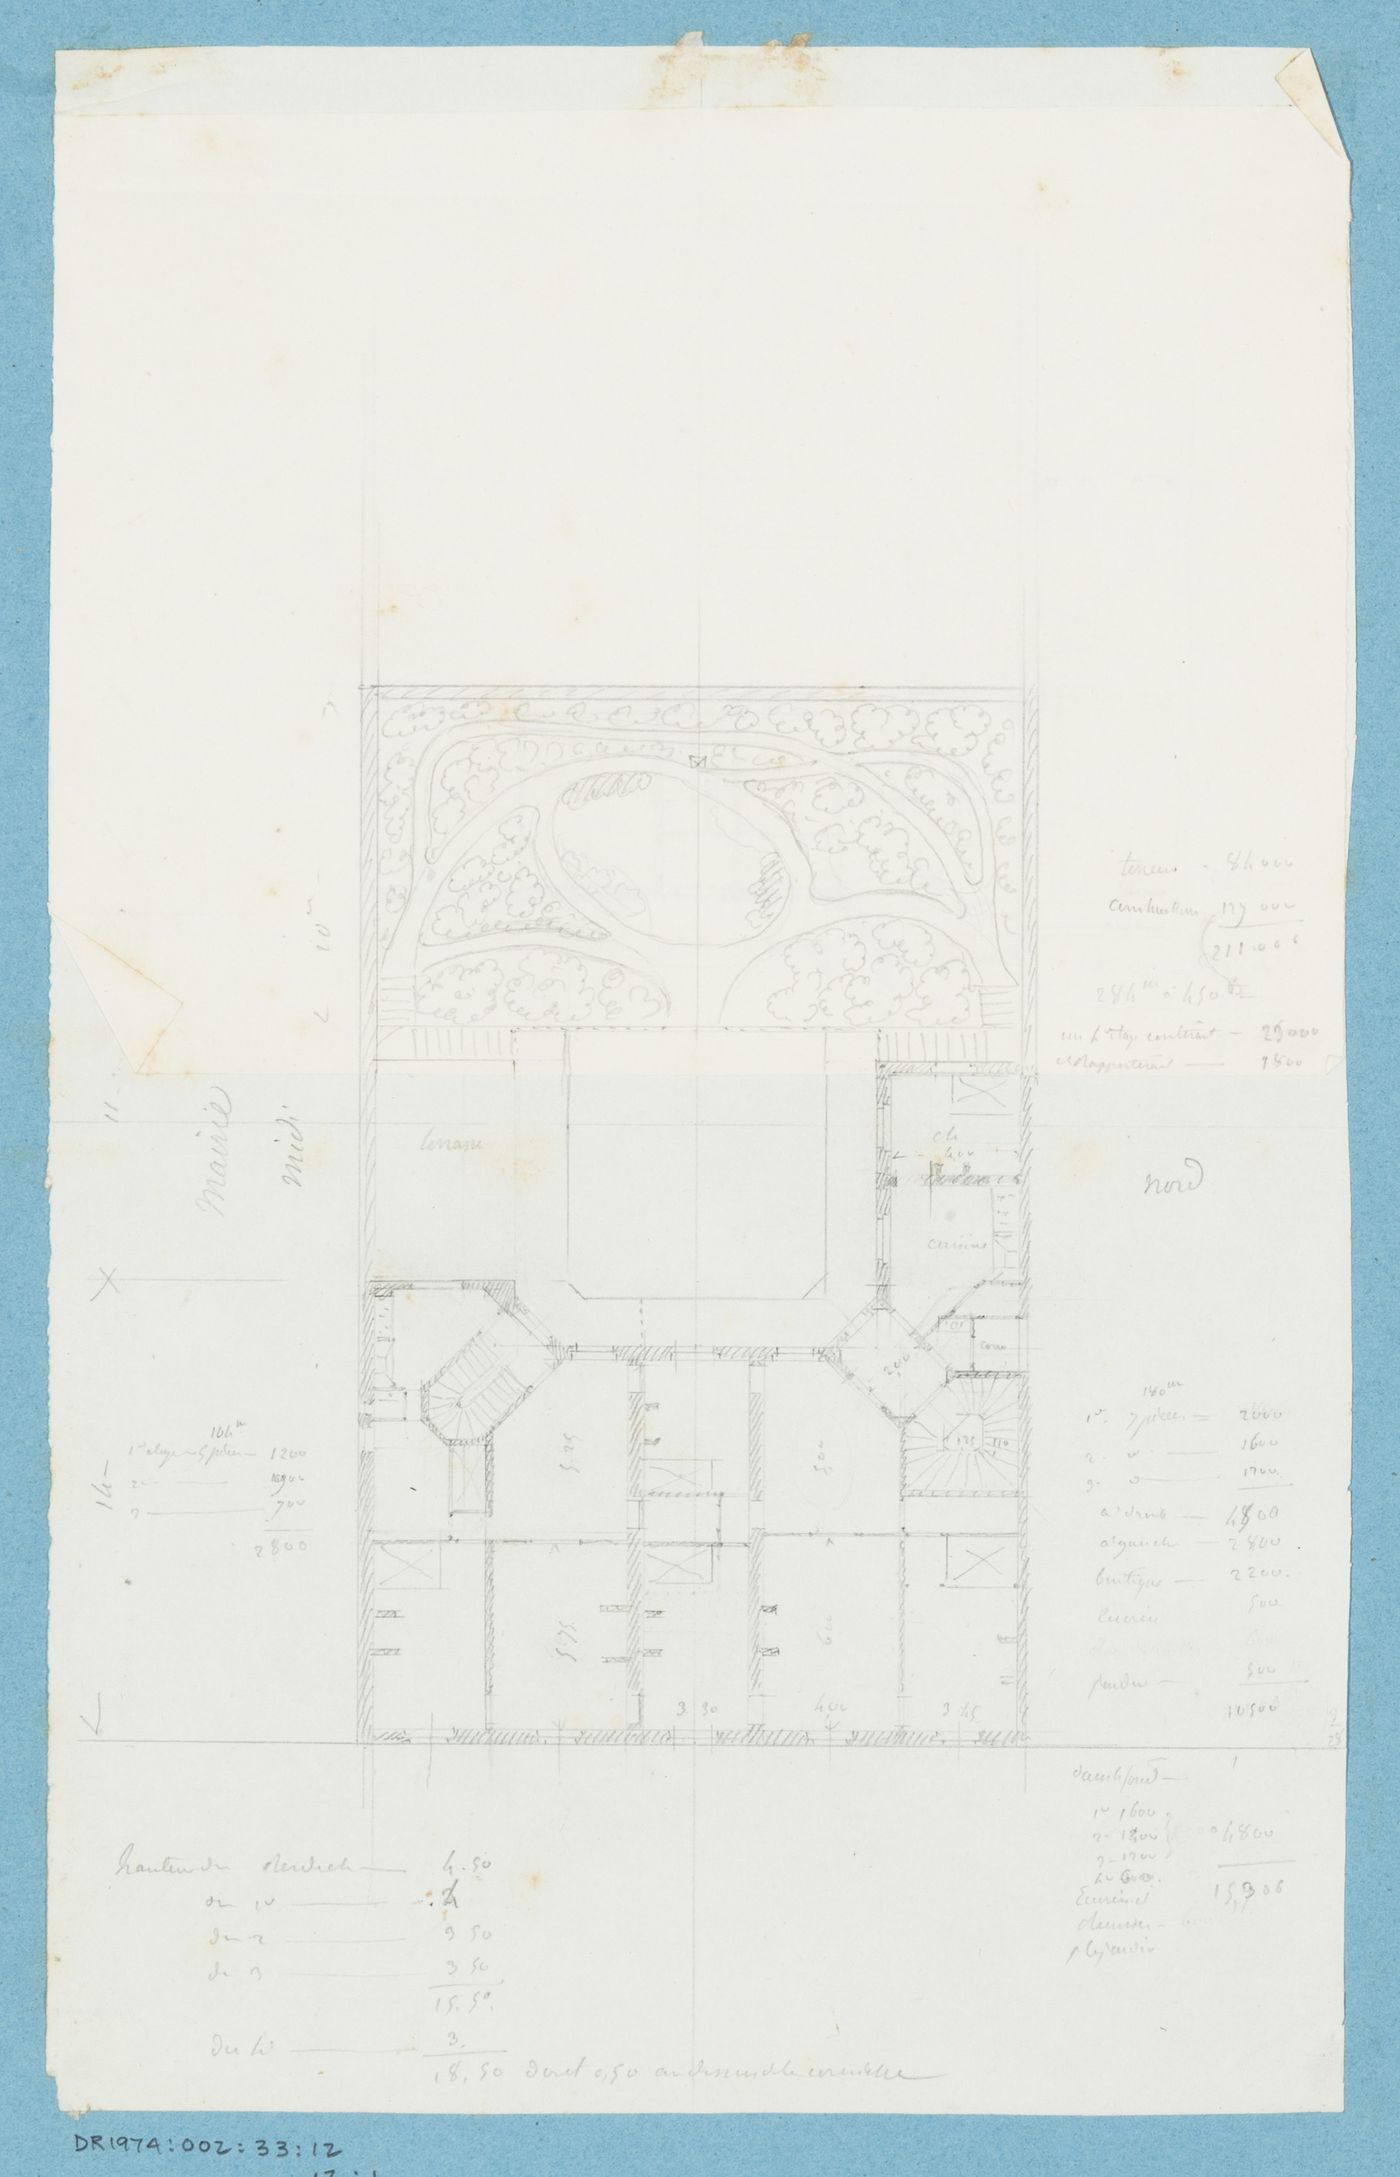 Project for a hôtel for M. Busche: Plan, probably for the first floor, showing two alternate designs for a four-storey hôtel with a garden or a central courtyard